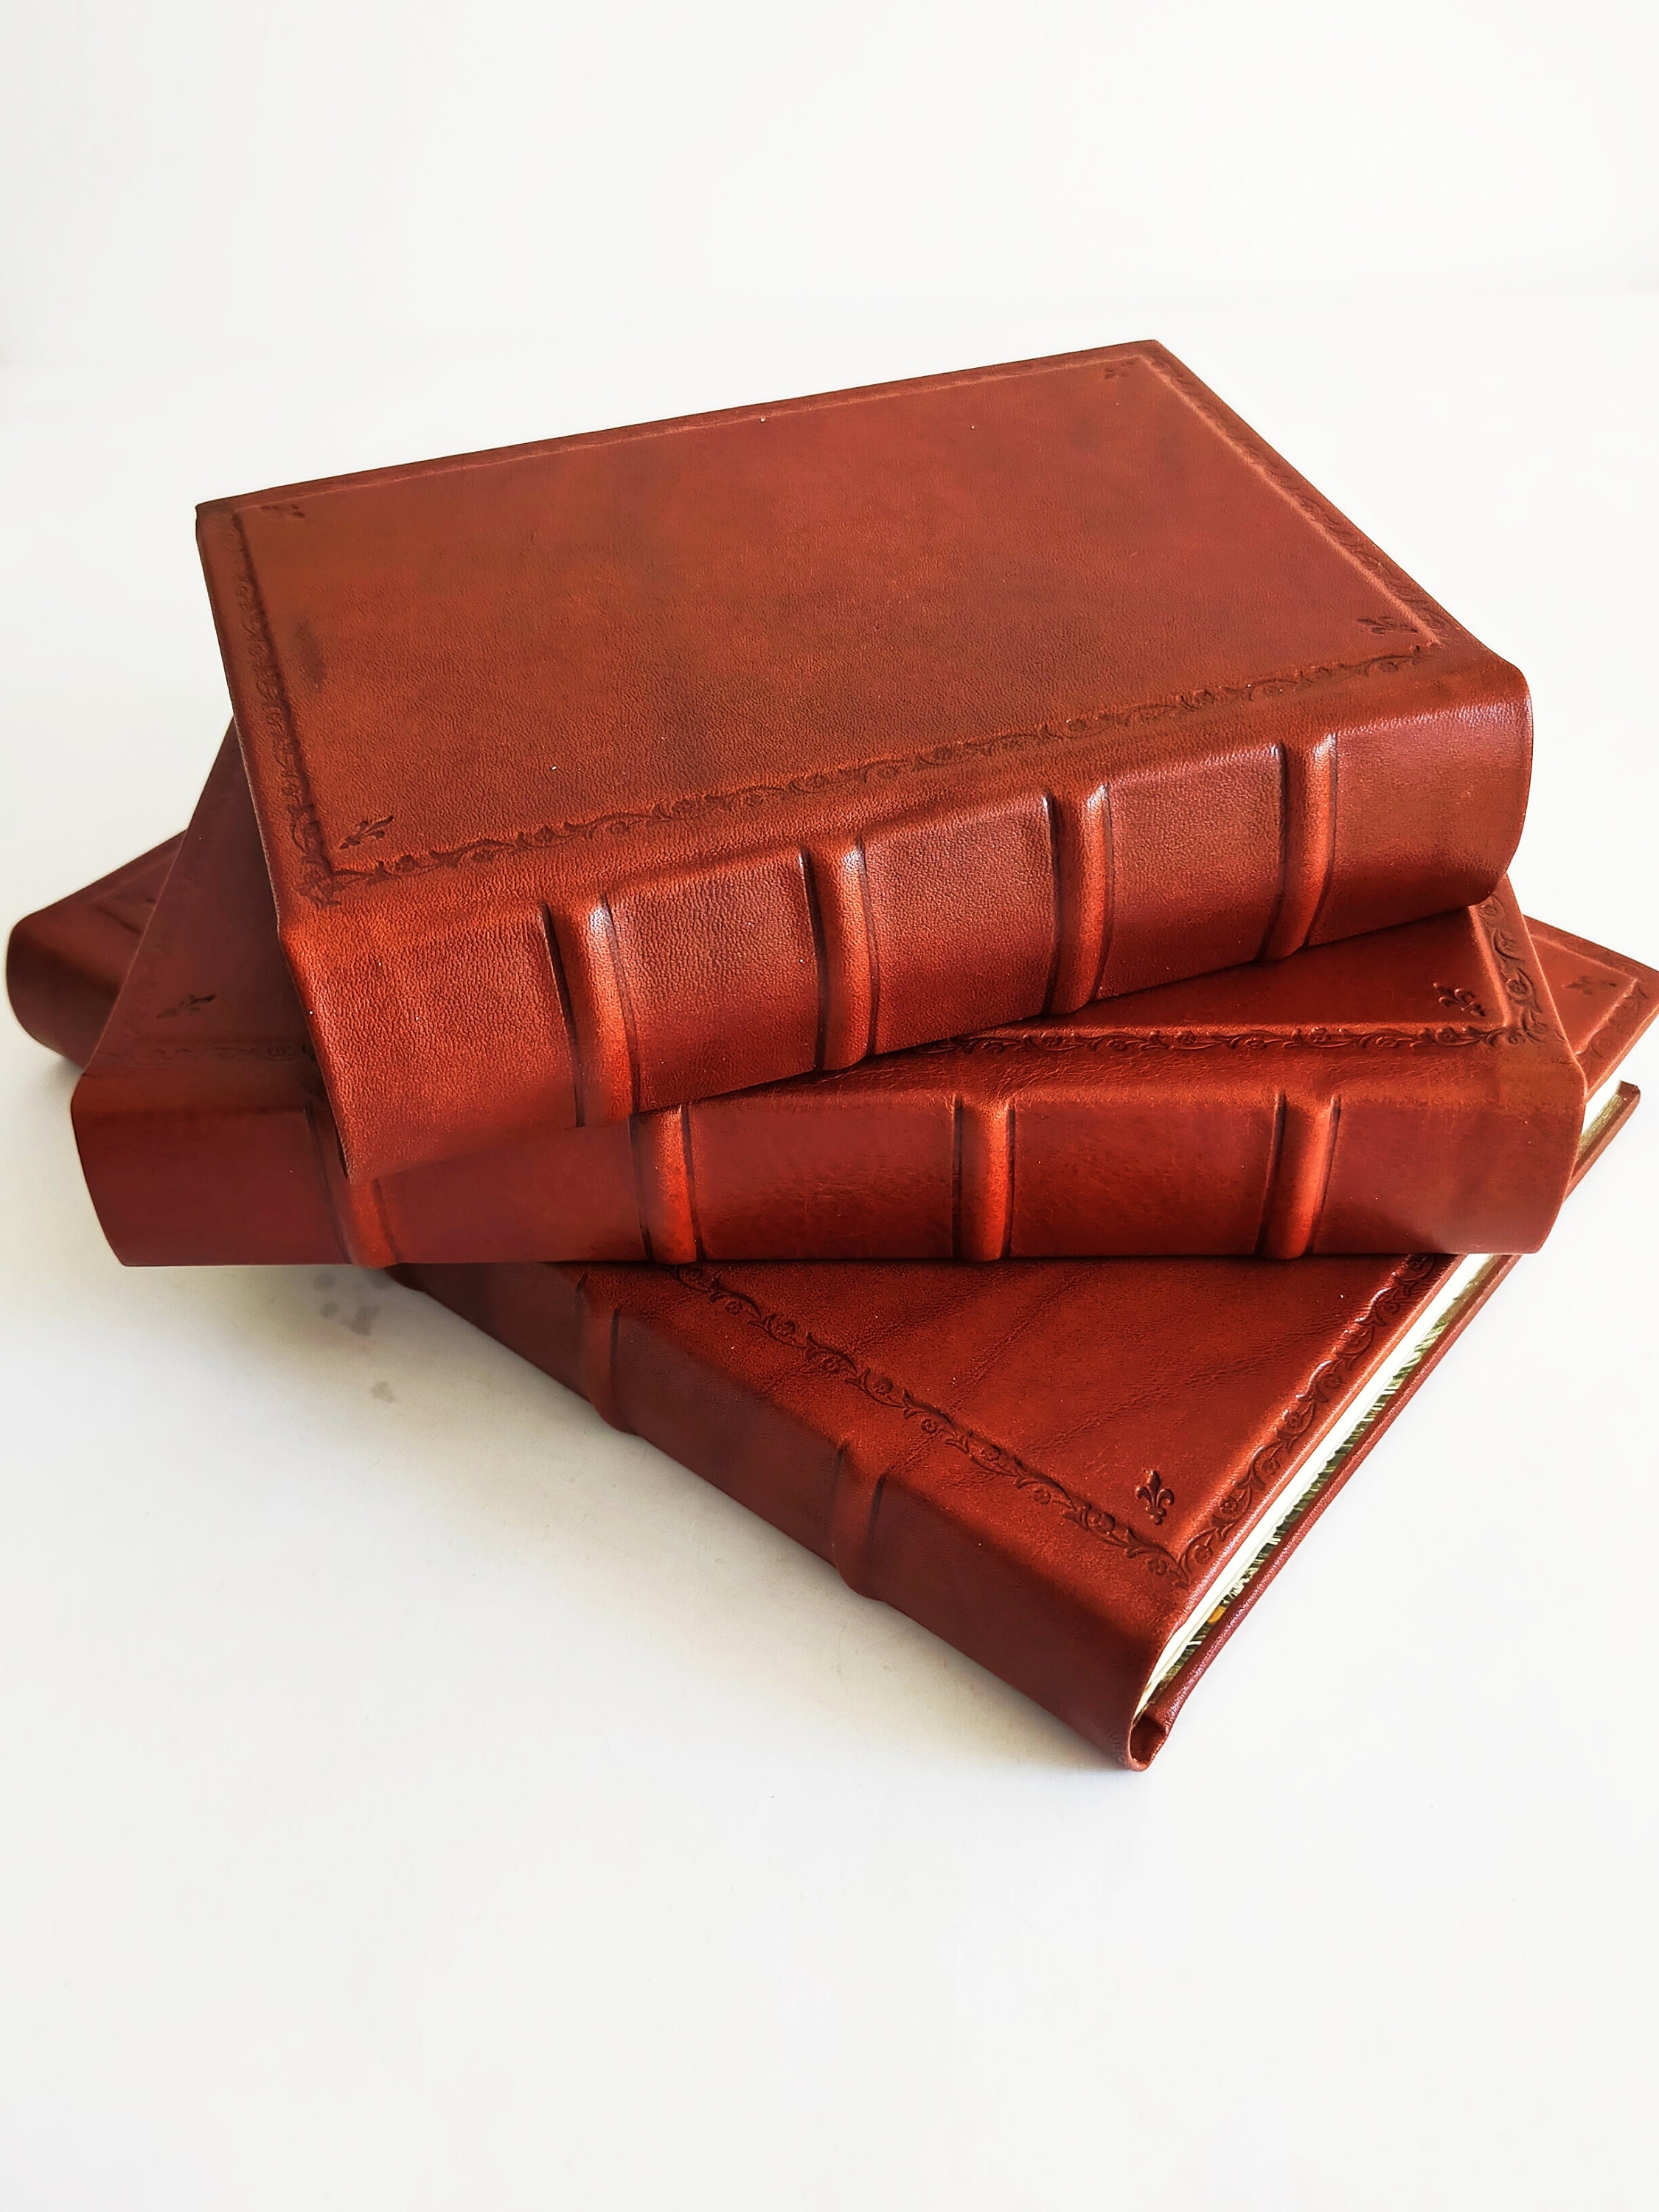 Leather Journal, Personalized Sketchbook, Leather Sketch Book